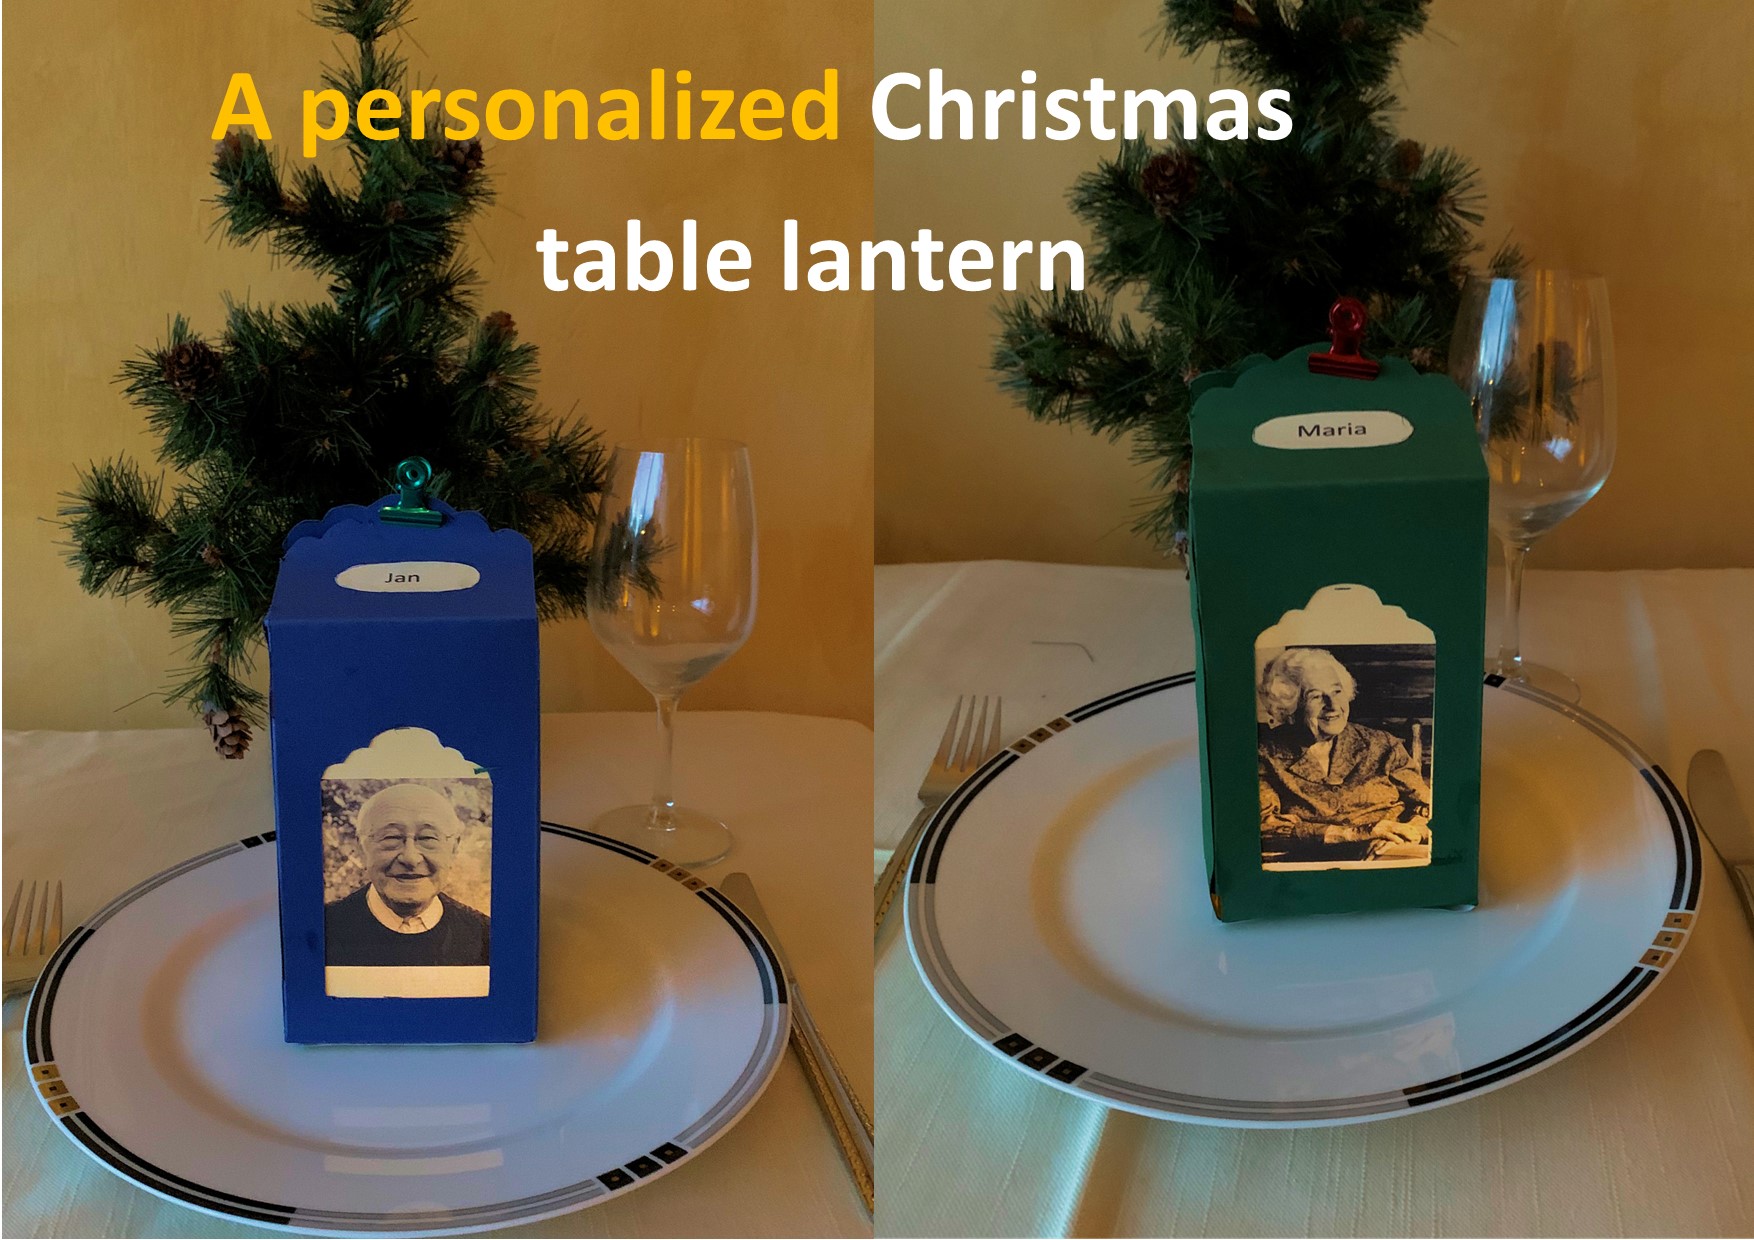 A Home made “Personal Christmas Lantern” featured image